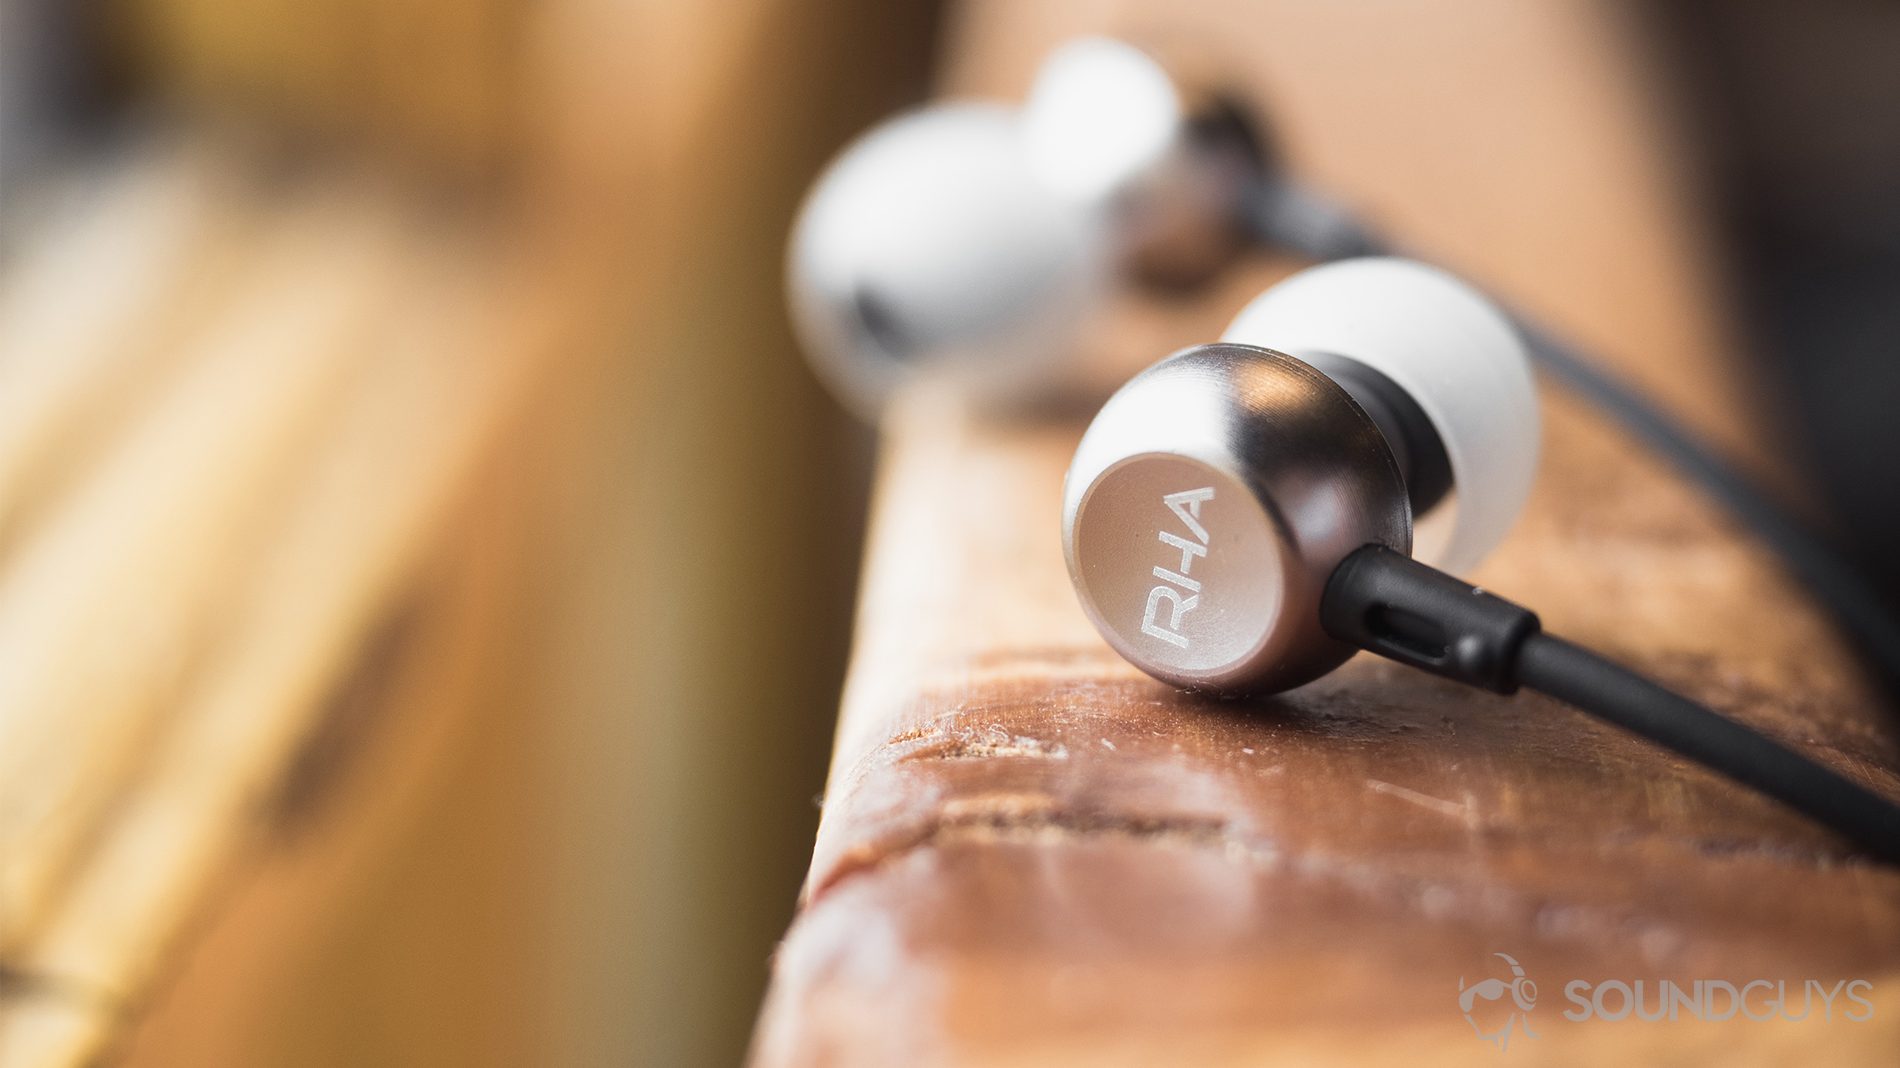 RHA MA390 review: The earbuds are placed on a railing--the closer one is facing away from the user to show off the RHA logo and other is directed toward the viewer but is slightly blurred.